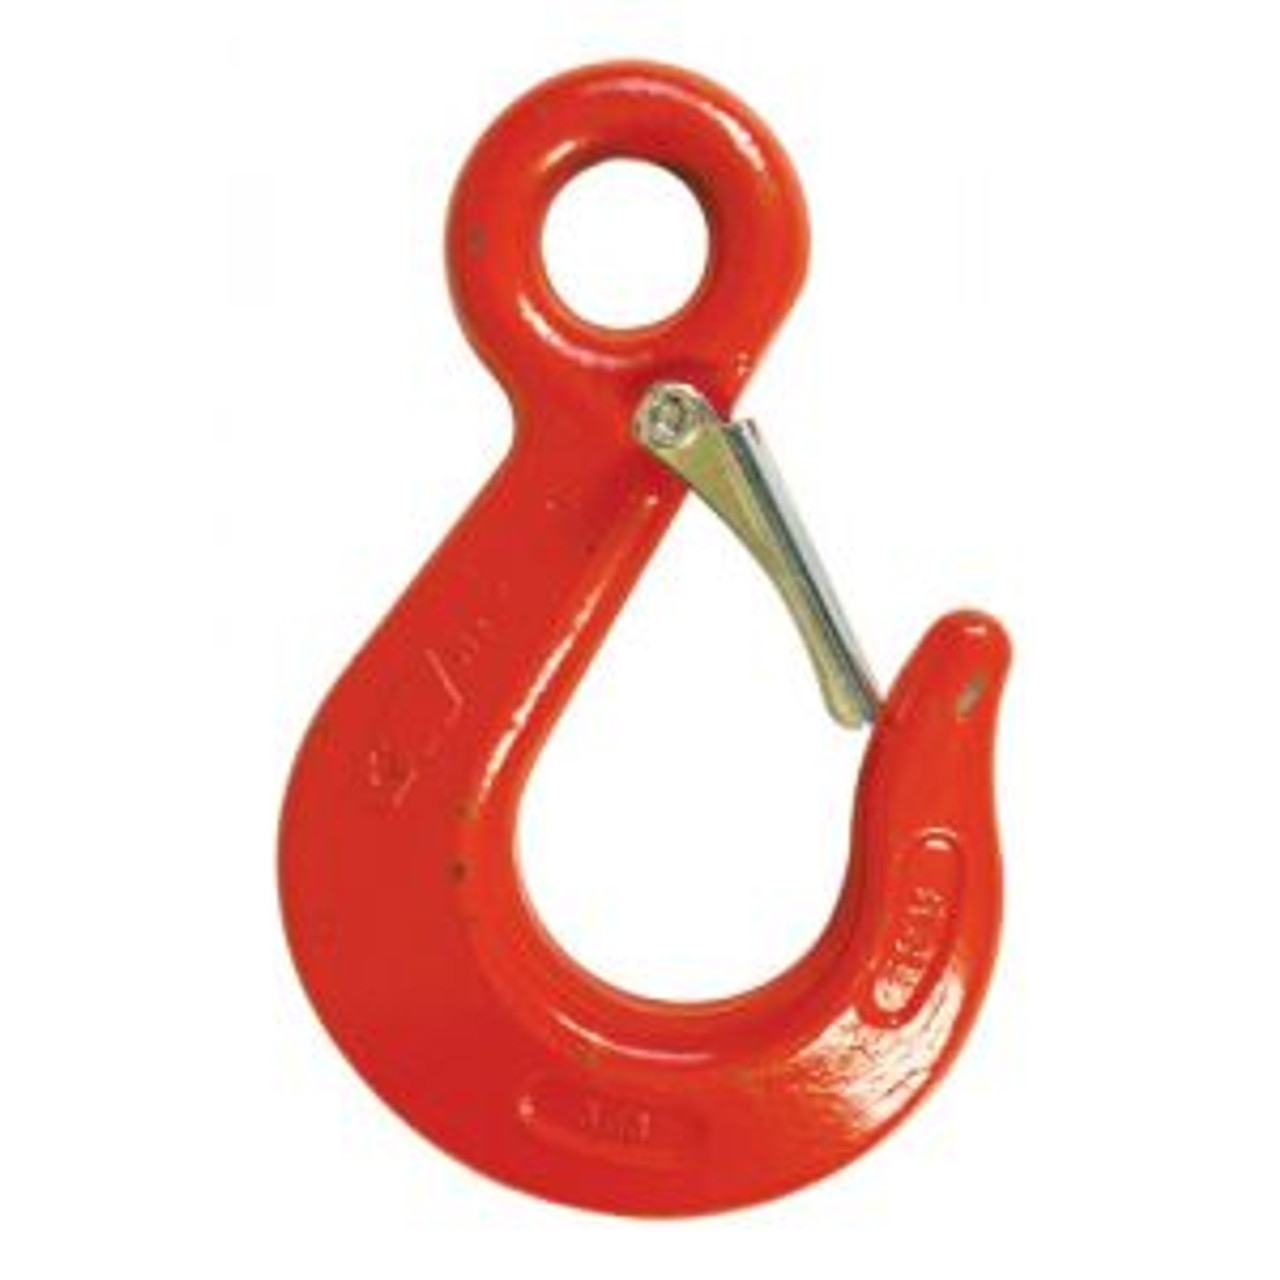 15 Ton Alloy Eye Hoist Hook With Latch, Made In USA. - 1st Chain Supply